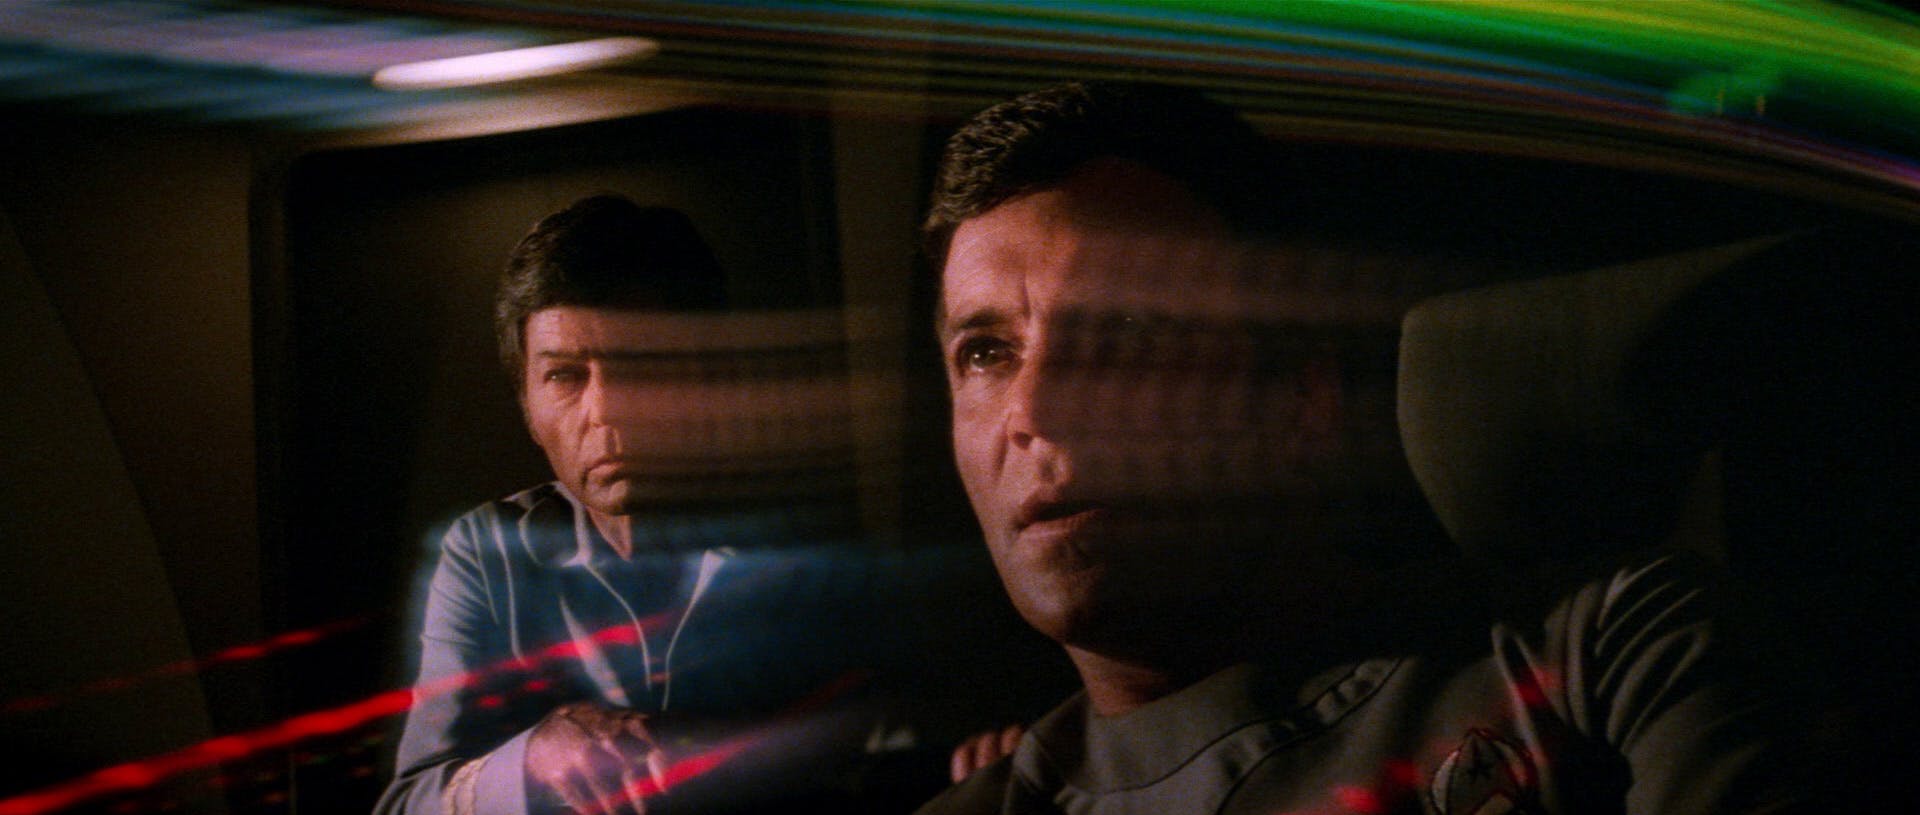 McCoy and Kirk endure the effects passing through a wormhole on the bridge of the Enterprise in Star Trek: The Motion Picture